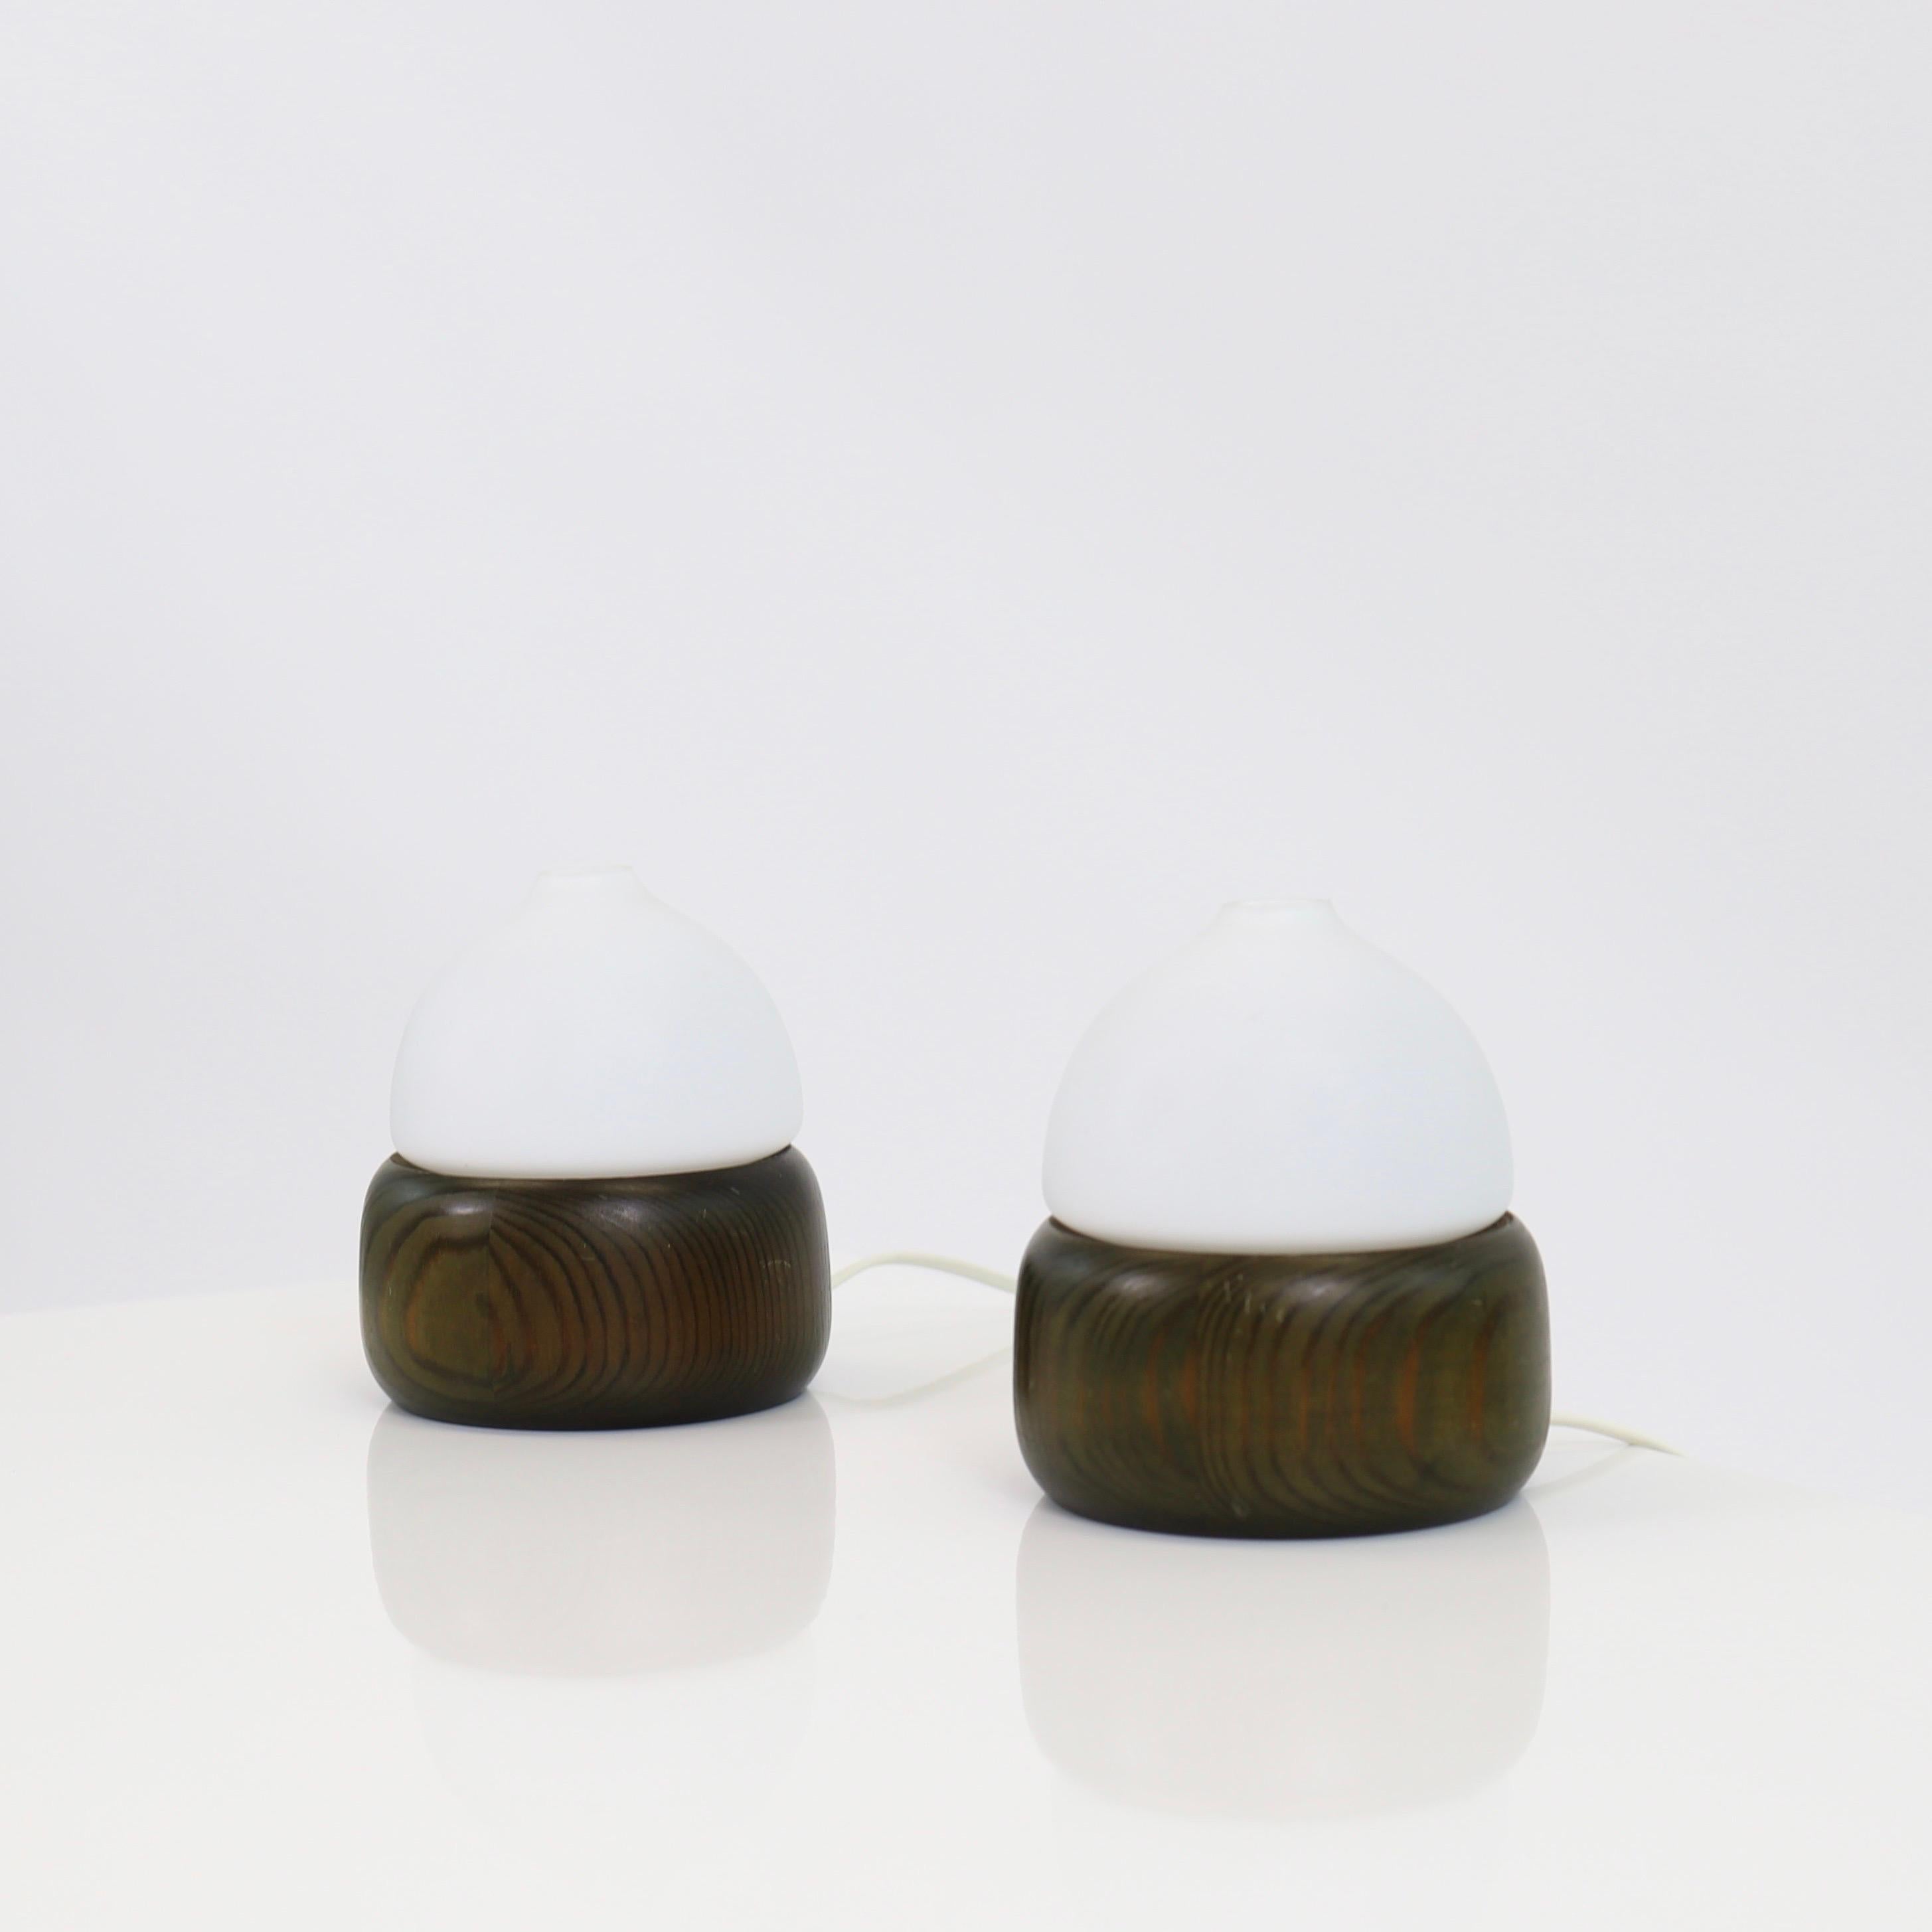 Set dark stained Pine Wood night lamps with white glass shades made by Aneta in the 1970s. A soft Scandinavian touch.

* A set of desk lamps / night lamps in dark stained pine wood with white round glass shades
* Manufacturer: Aneta, Sweden
* Year: